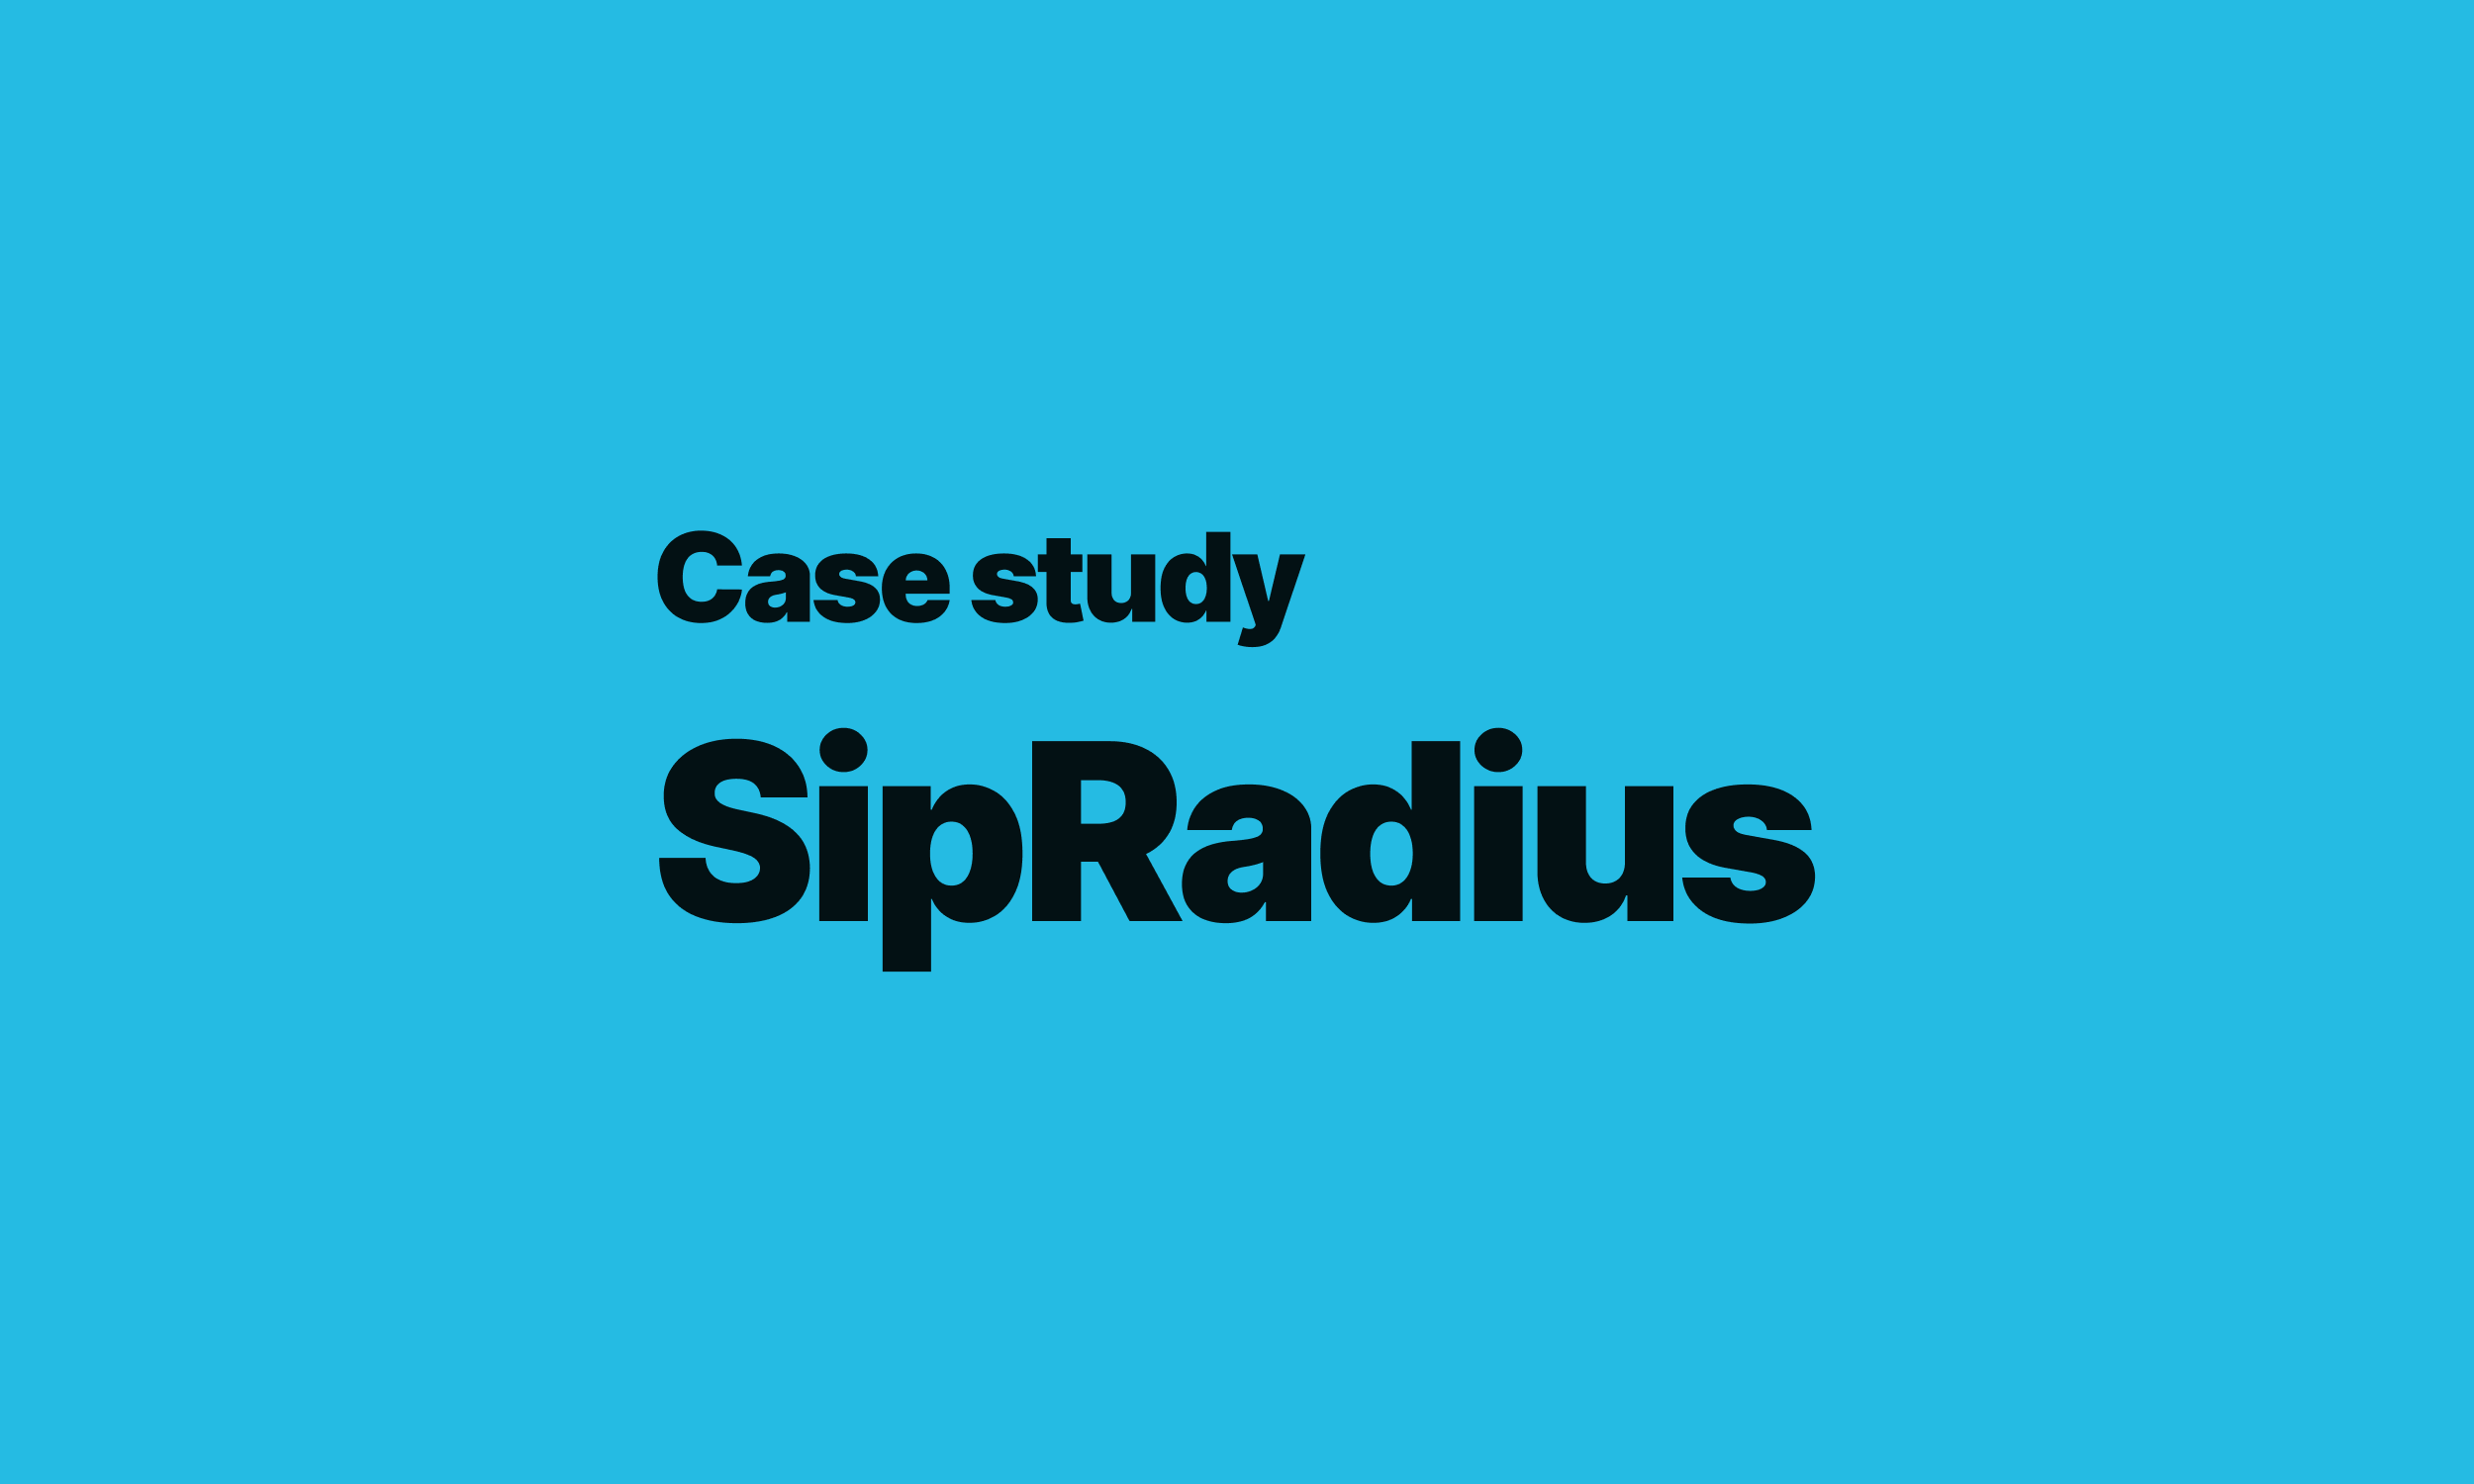 How SipRadius disrupted the TV broadcast industry during the pandemic